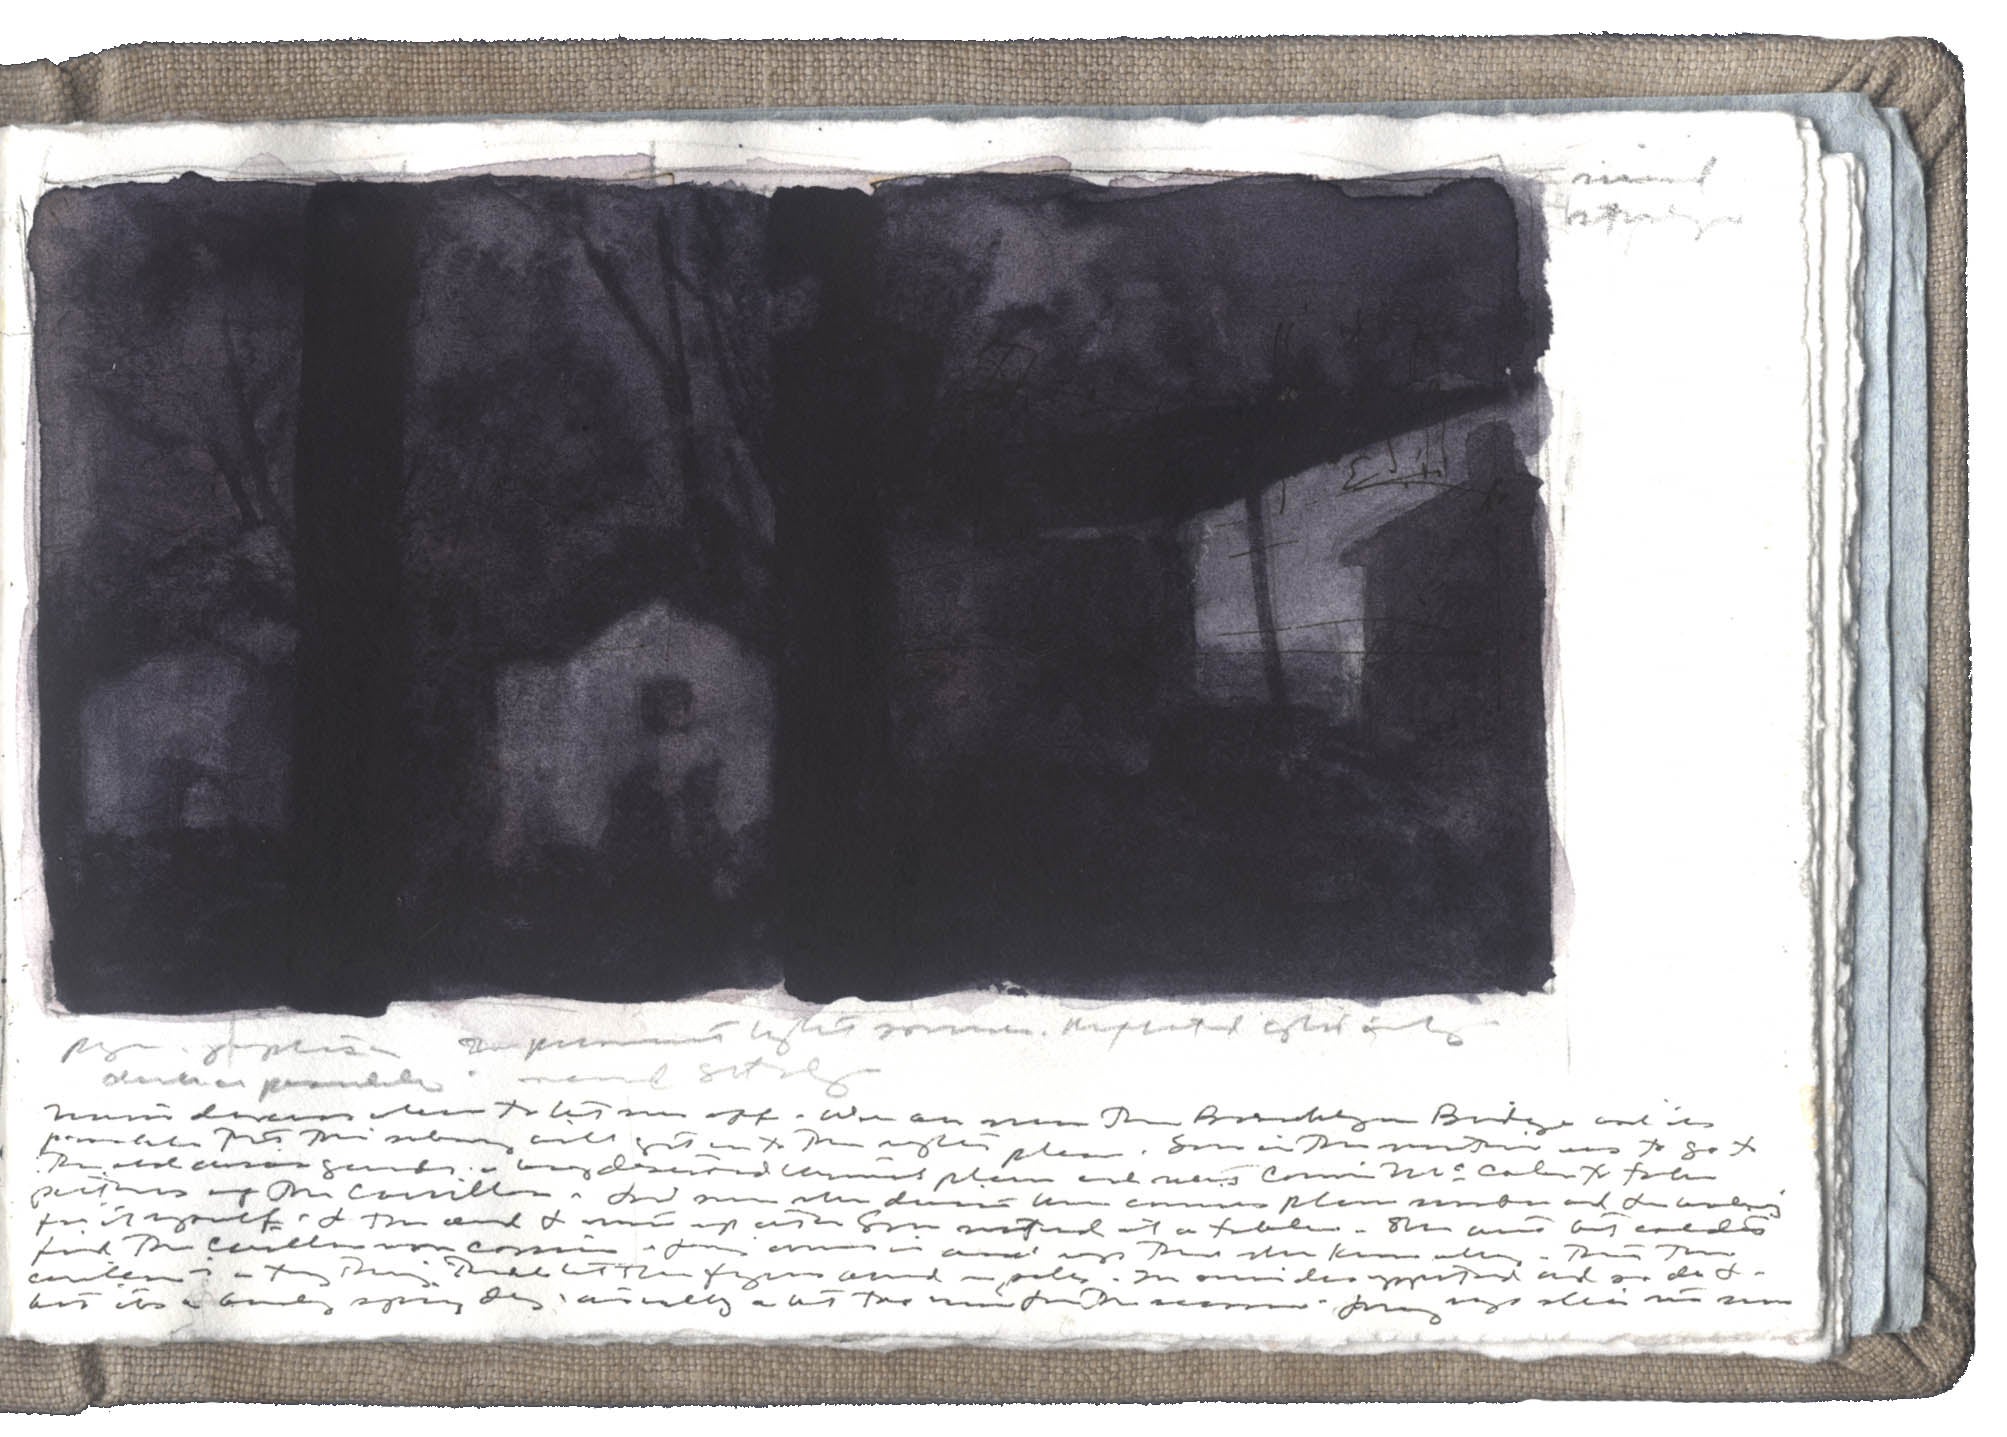 Second Study for Houses and Sheds: Winter Night image